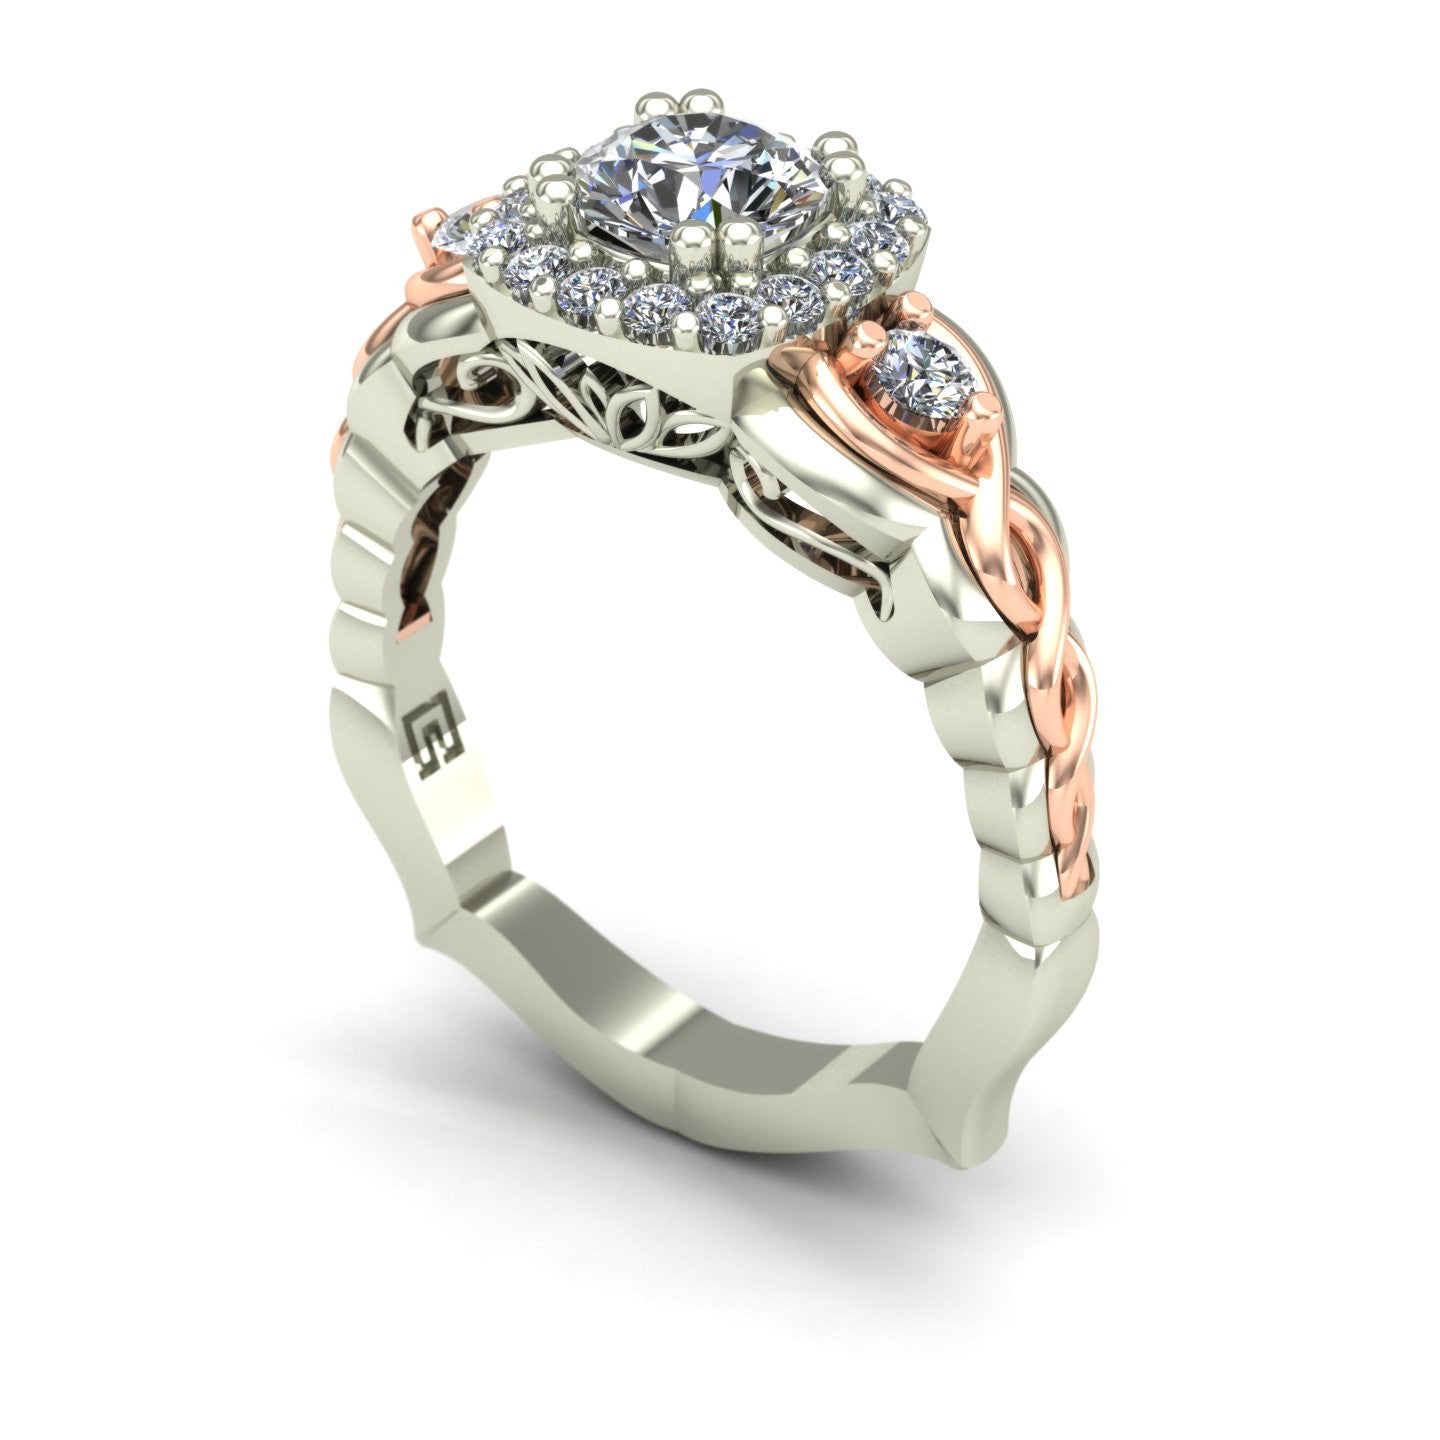 Two-Tone White and Rose Gold Diamond Ring